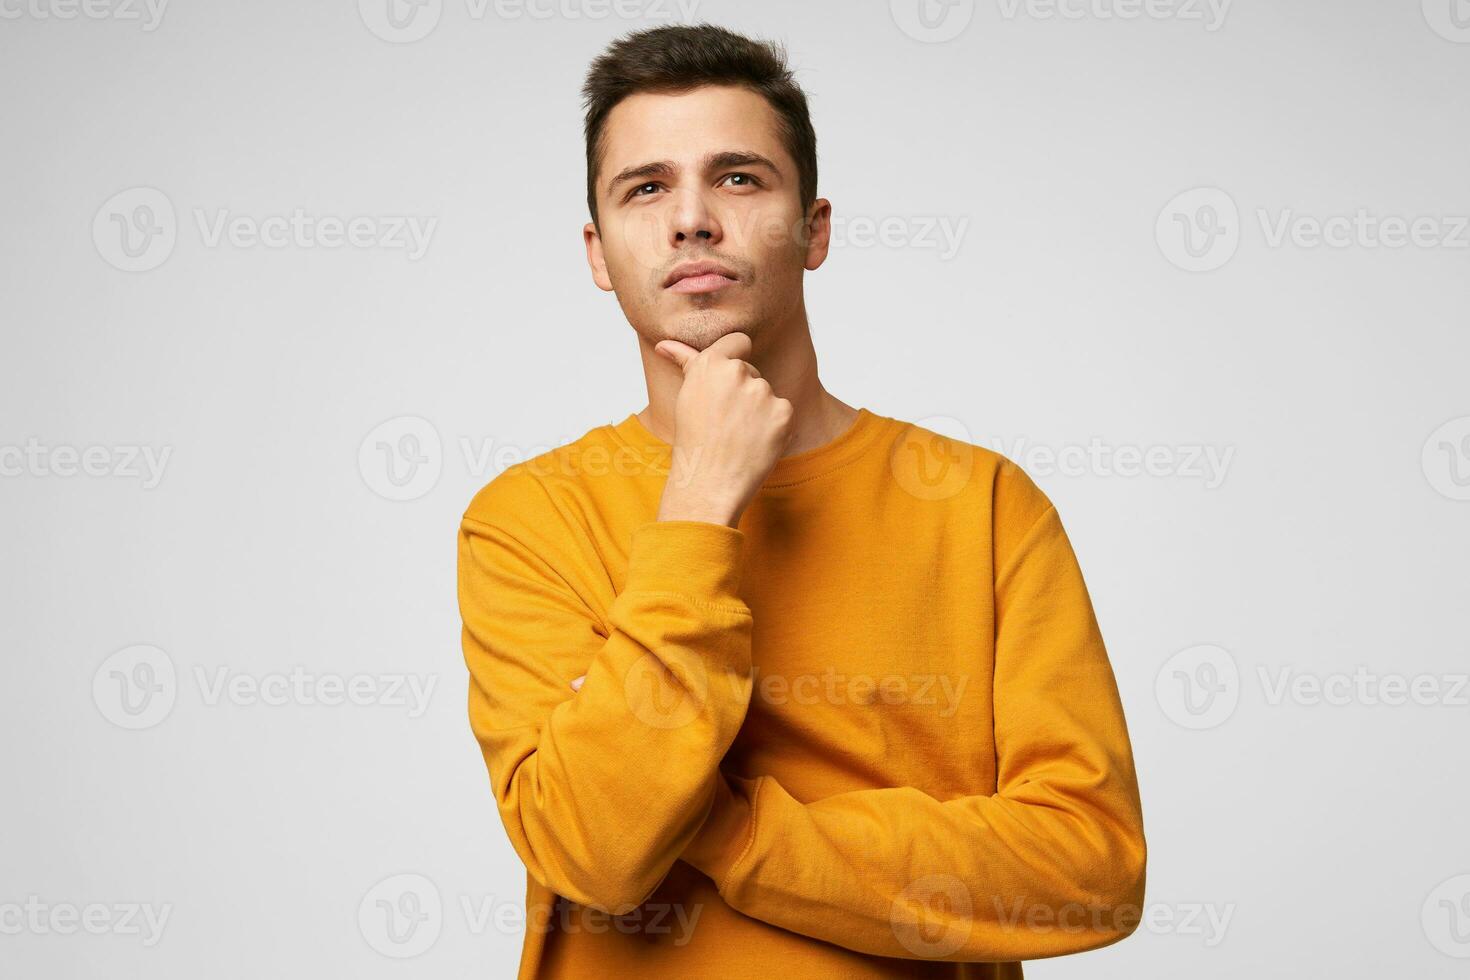 A handsome guy looks into the distance up, his head slightly raised, holding his chin, thinks about his future, make plans, dreams, feels confident in his abilities, isolated over white background photo